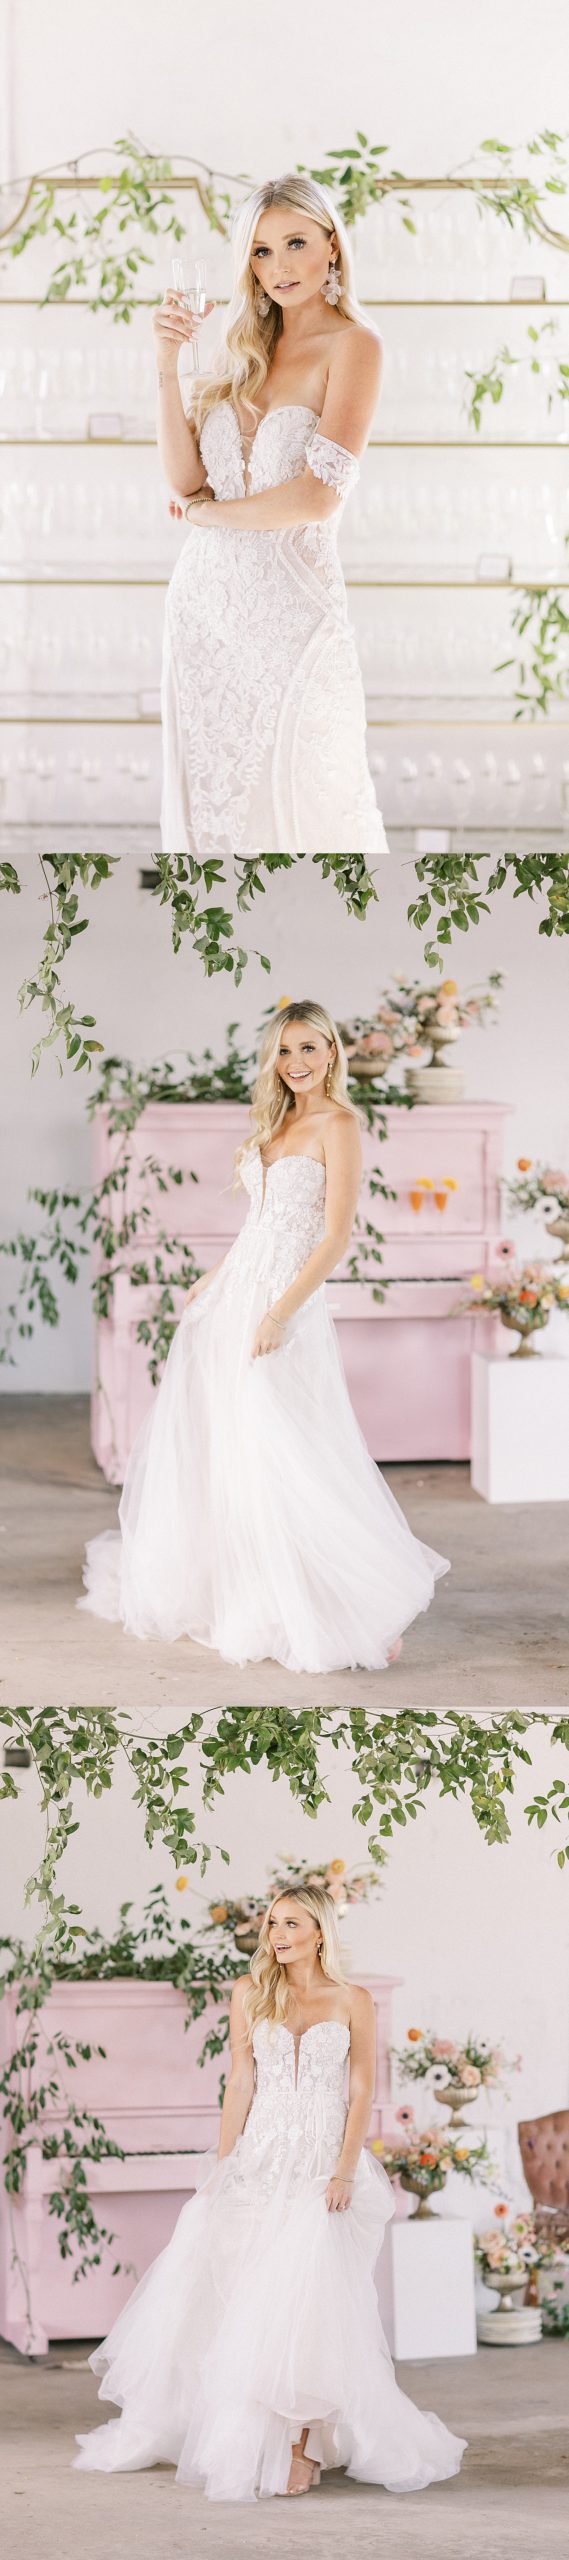 Bride standing in front of pink piano available for rent as wedding furniture with North Dakota photographer